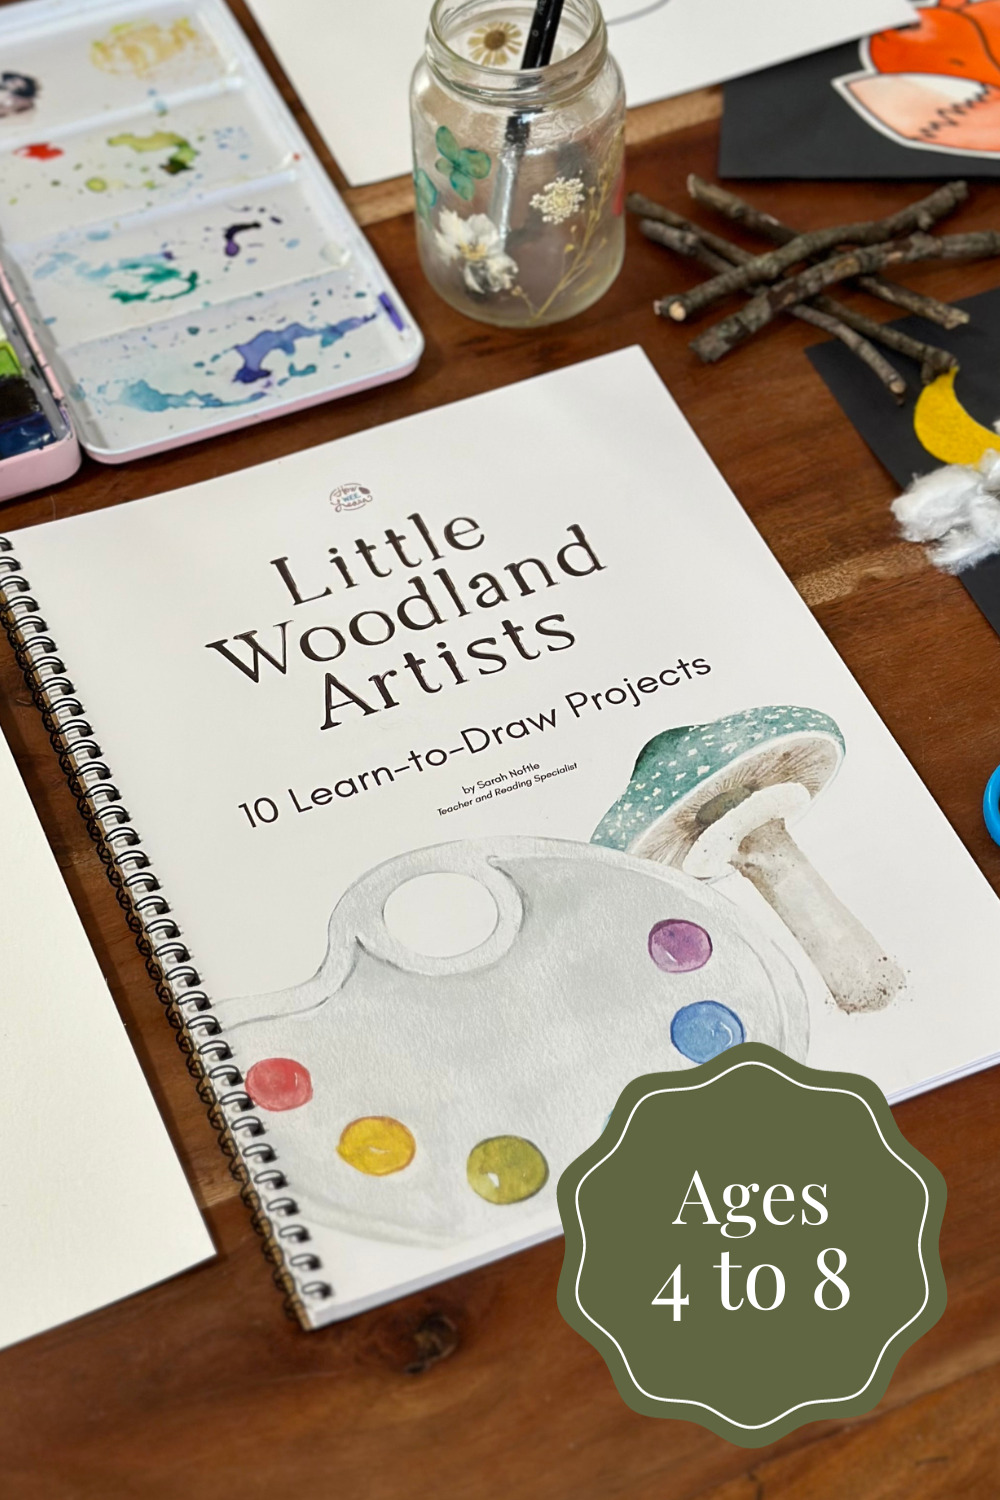 Little Woodland Artists: 10 Learn-to-Draw Projects, Ages 4 to 8